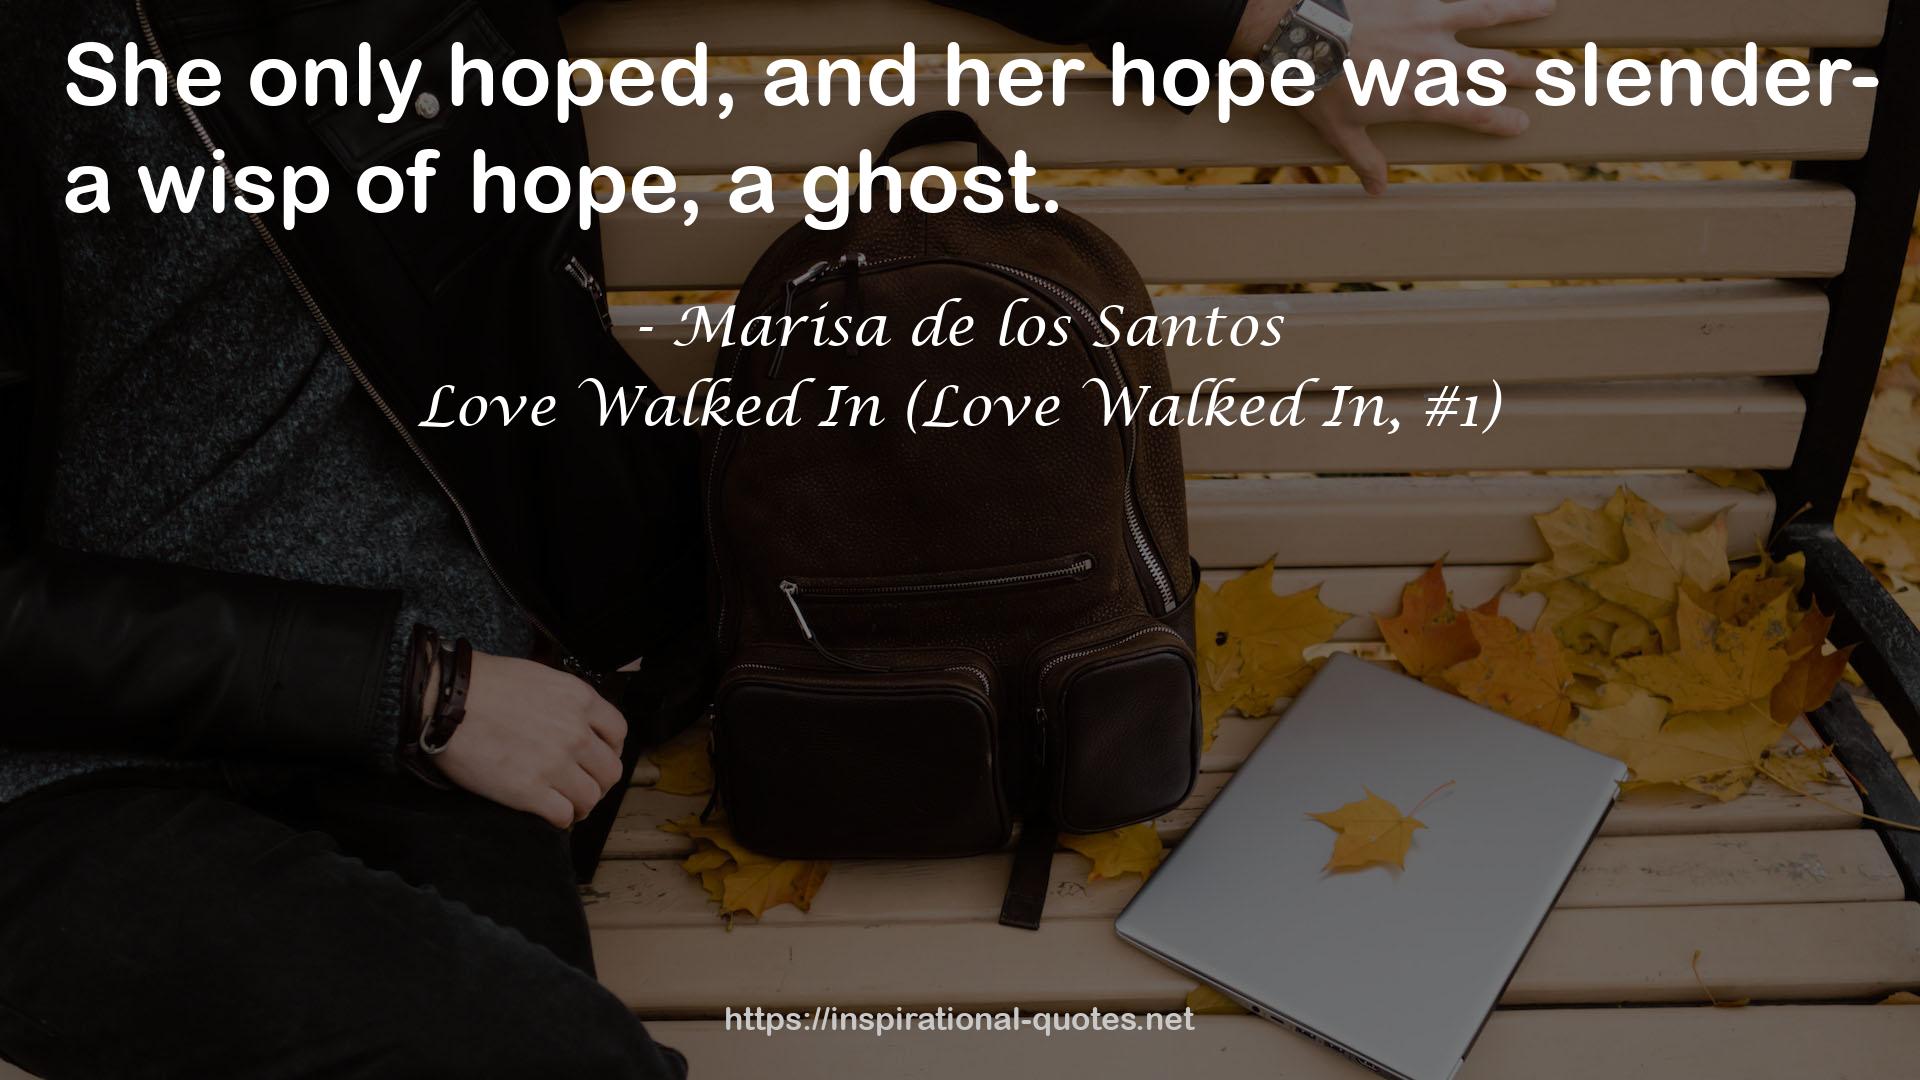 Love Walked In (Love Walked In, #1) QUOTES